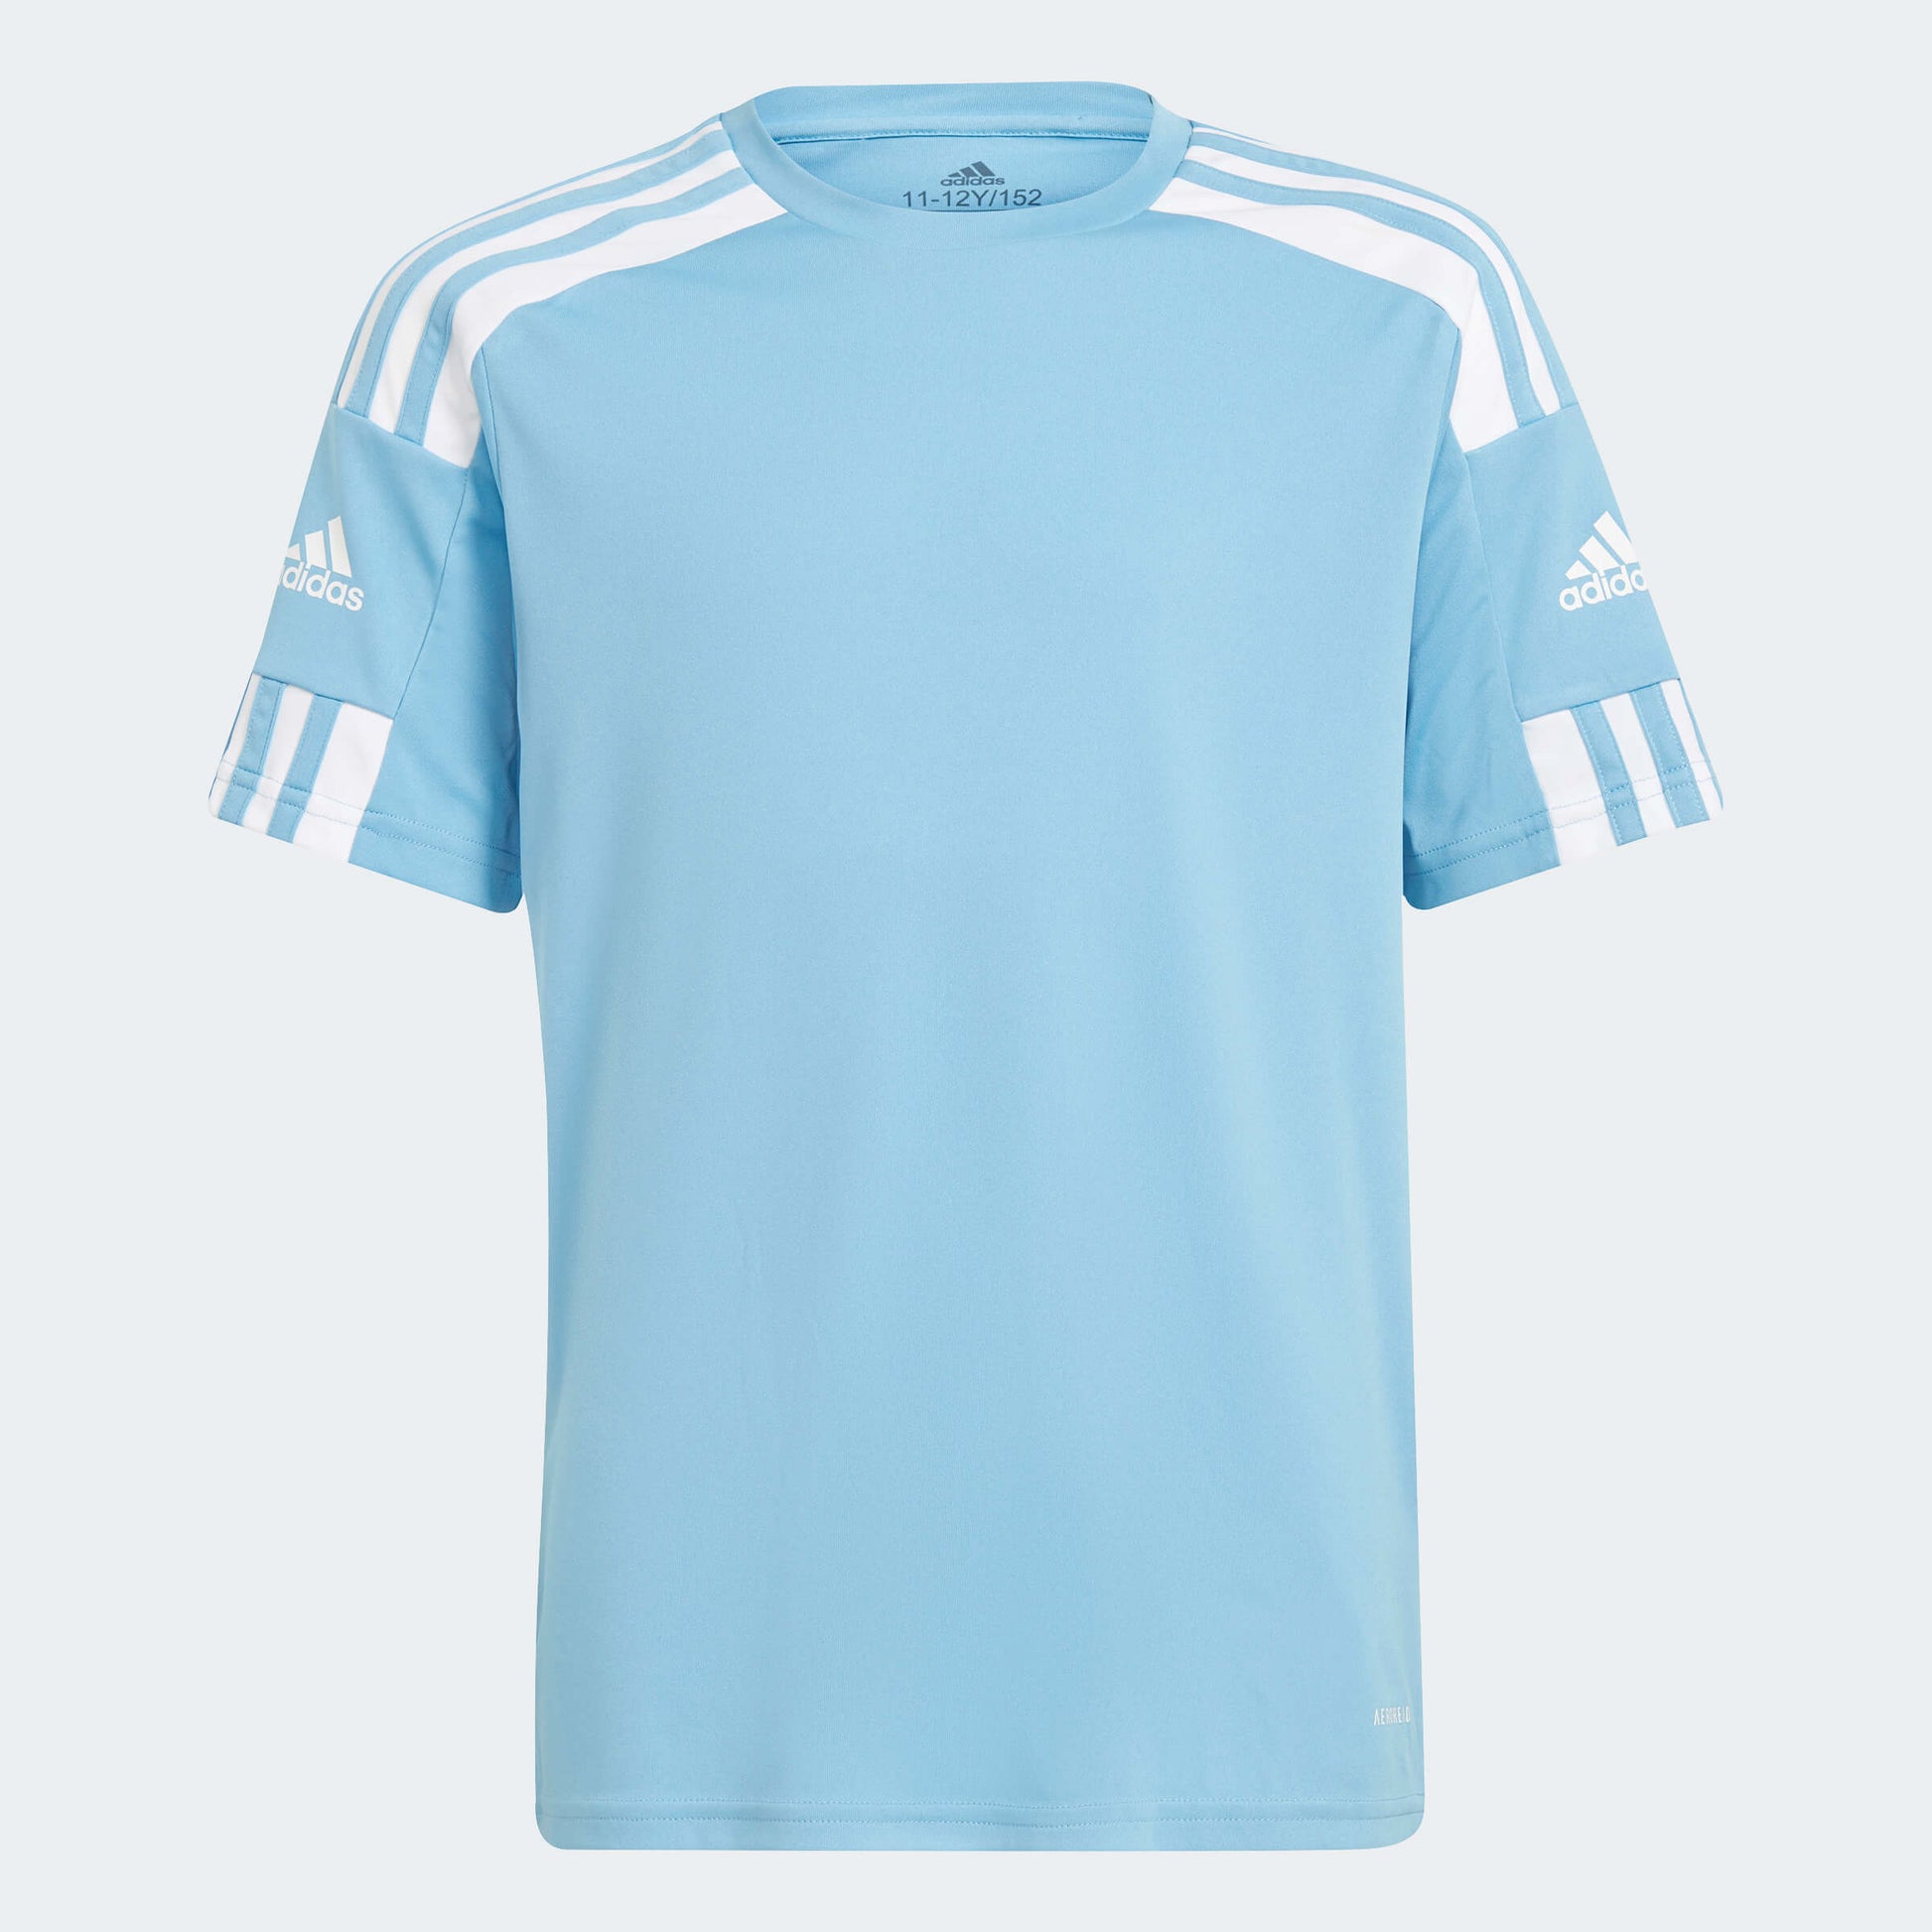 adidas YOUTH Squadra 21 Jersey Light Blue-White (Front)